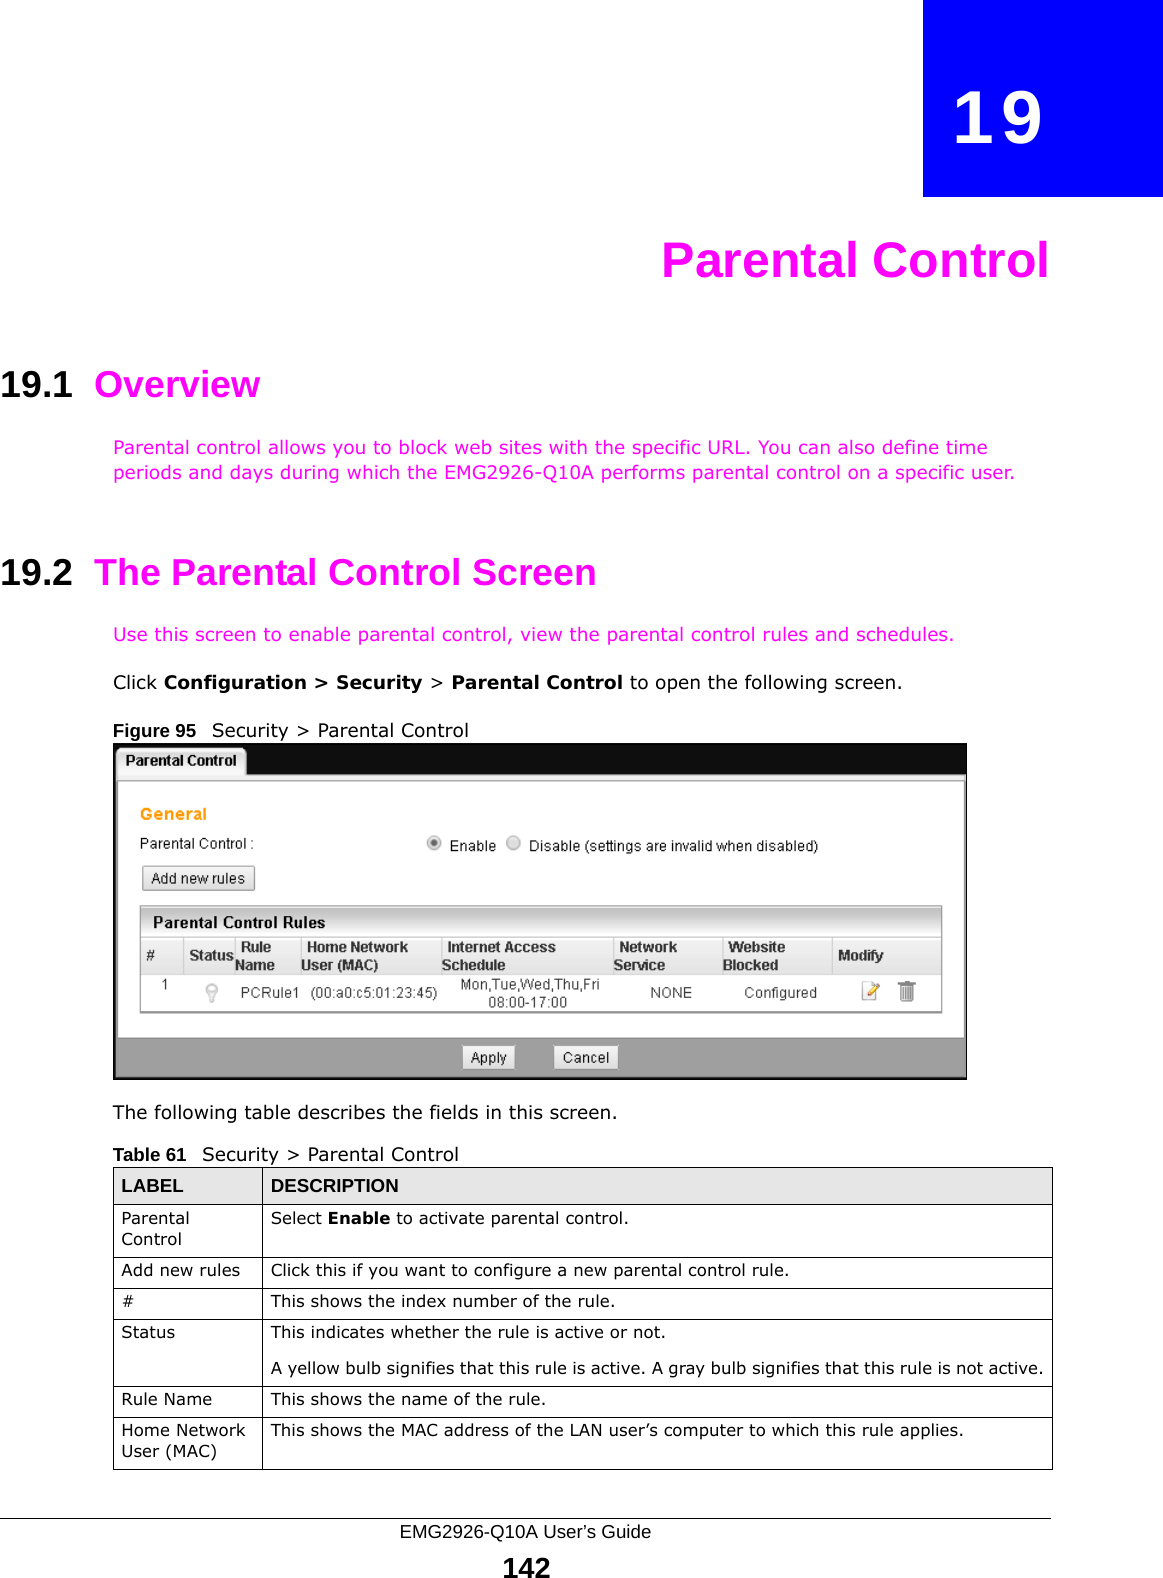 EMG2926-Q10A User’s Guide142CHAPTER   19Parental Control19.1  OverviewParental control allows you to block web sites with the specific URL. You can also define time periods and days during which the EMG2926-Q10A performs parental control on a specific user. 19.2  The Parental Control ScreenUse this screen to enable parental control, view the parental control rules and schedules.Click Configuration &gt; Security &gt; Parental Control to open the following screen. Figure 95   Security &gt; Parental Control The following table describes the fields in this screen. Table 61   Security &gt; Parental ControlLABEL DESCRIPTIONParental ControlSelect Enable to activate parental control.Add new rules Click this if you want to configure a new parental control rule.#This shows the index number of the rule.Status This indicates whether the rule is active or not.A yellow bulb signifies that this rule is active. A gray bulb signifies that this rule is not active.Rule Name This shows the name of the rule.Home Network User (MAC)This shows the MAC address of the LAN user’s computer to which this rule applies.